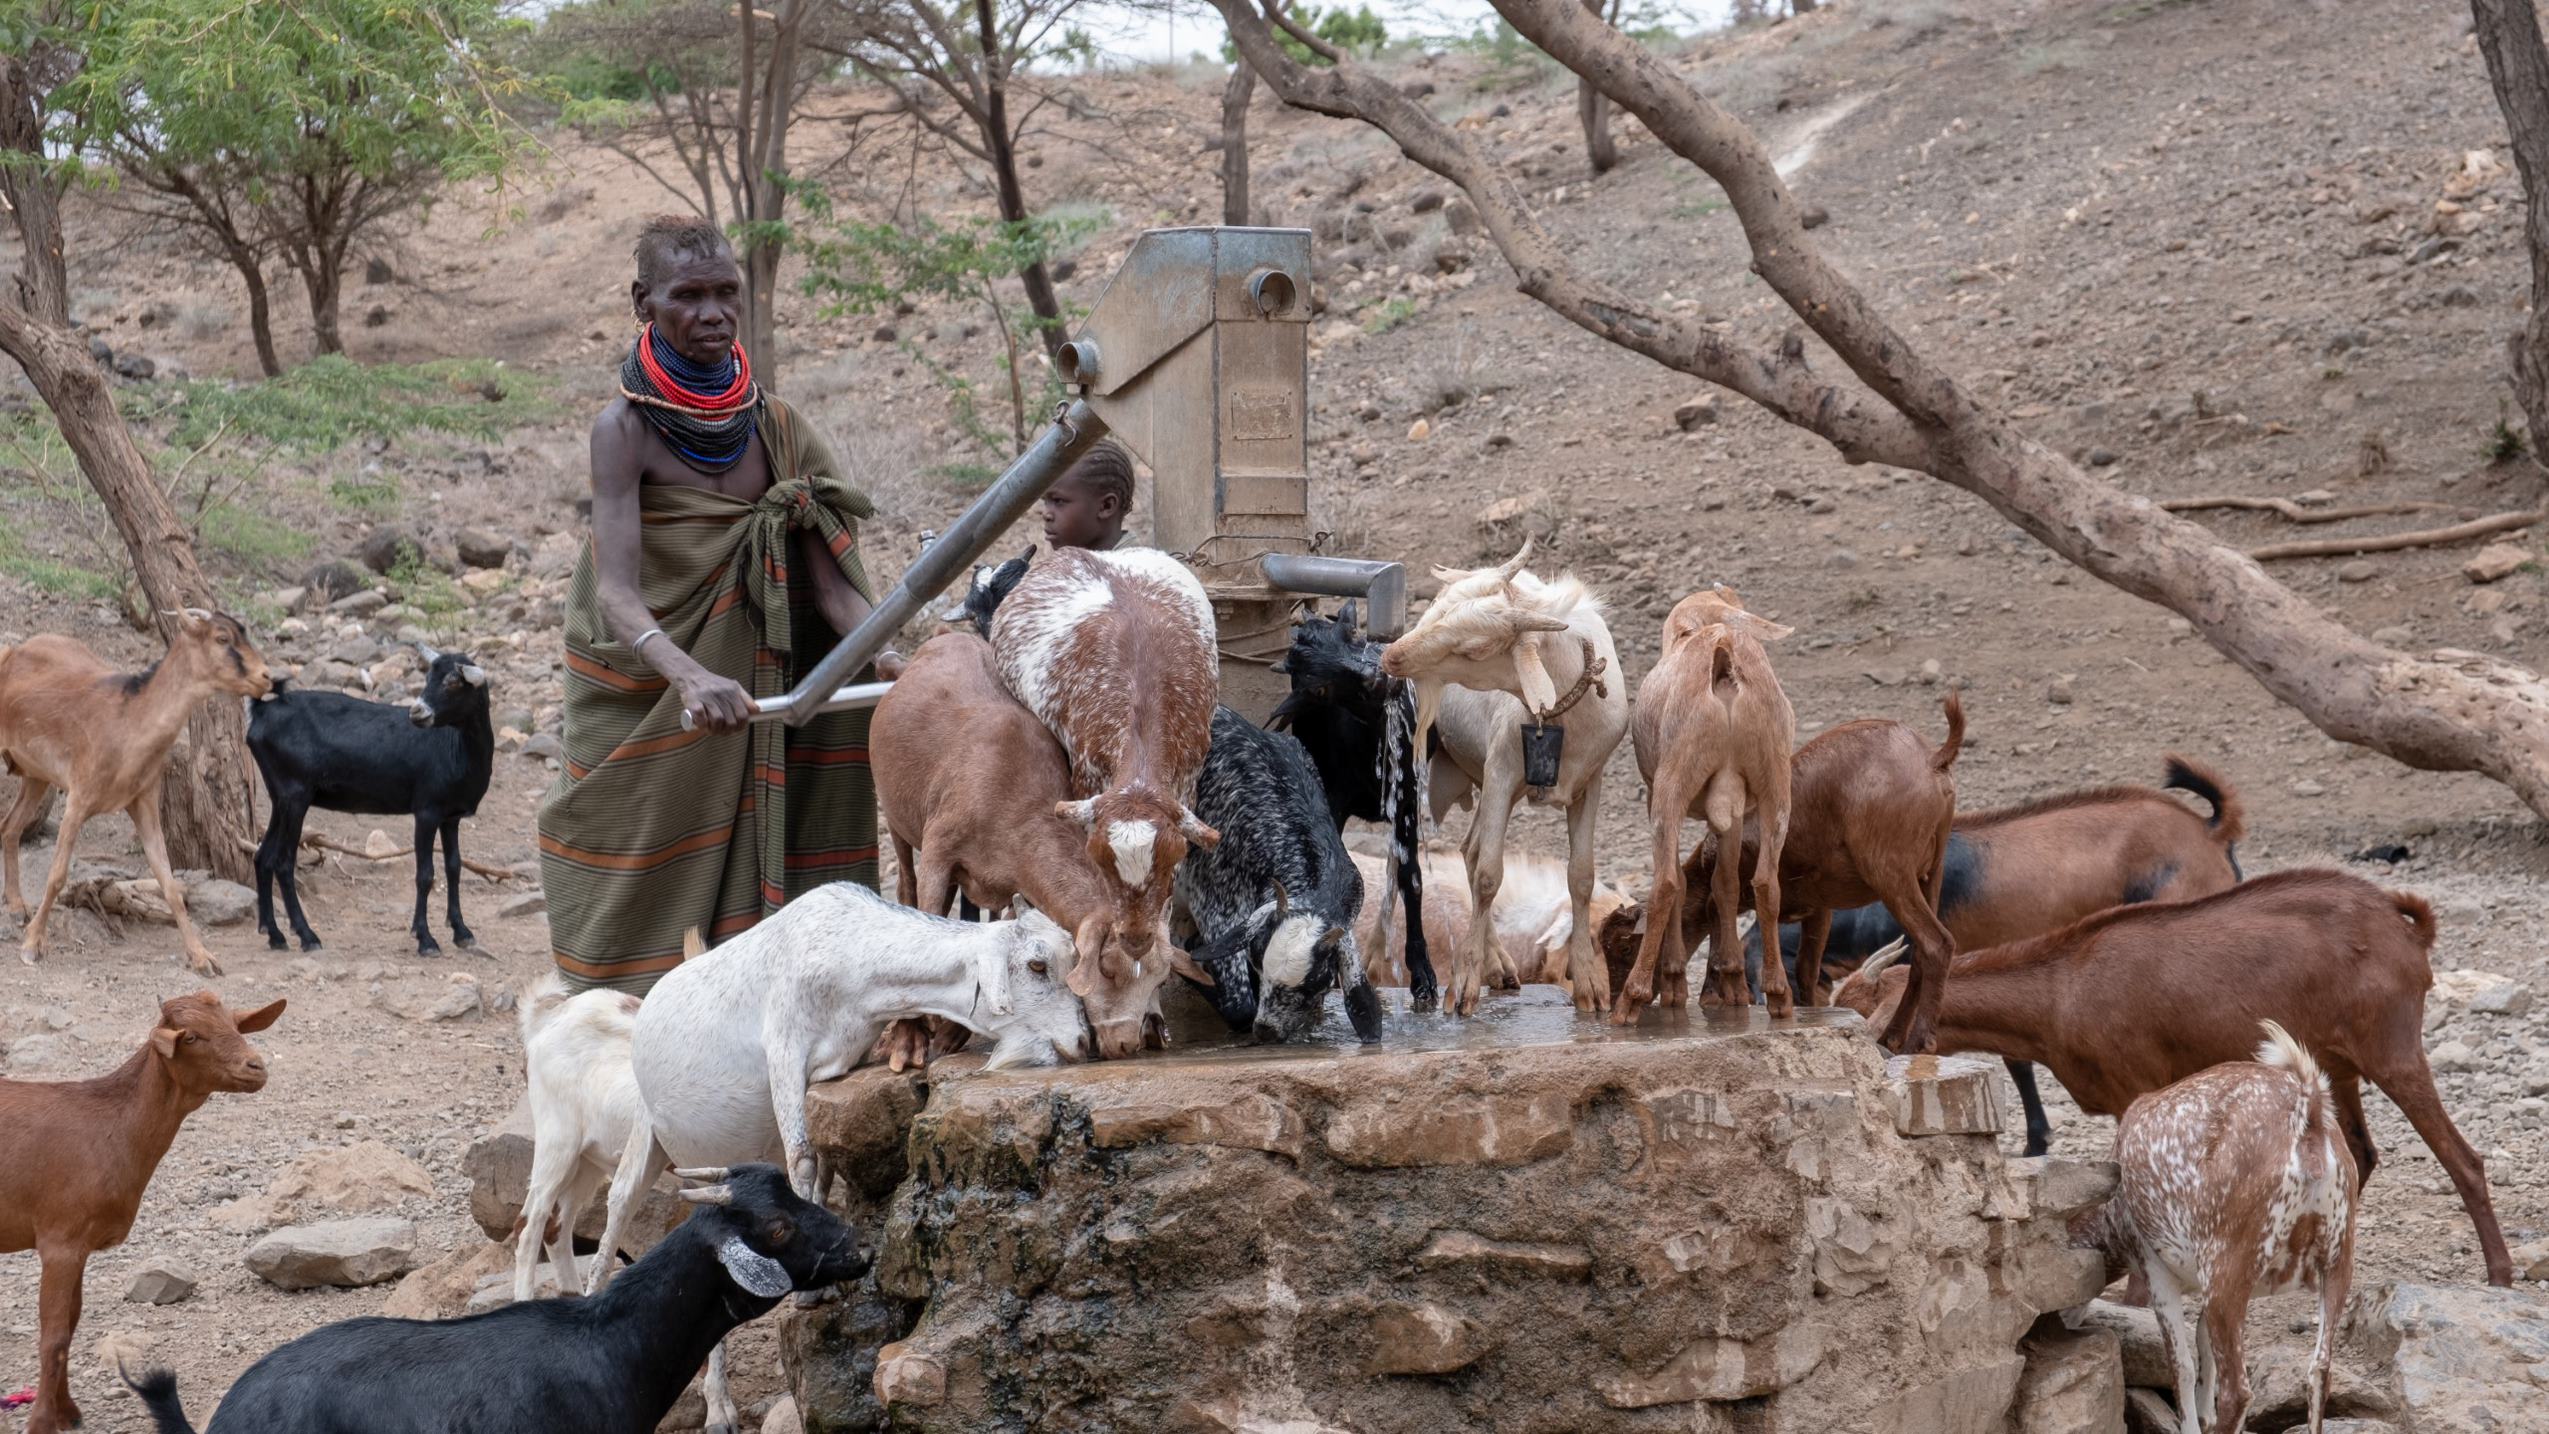 An elderly lady pumping water for her goats at a borehole. The water is too saline for human consumption.